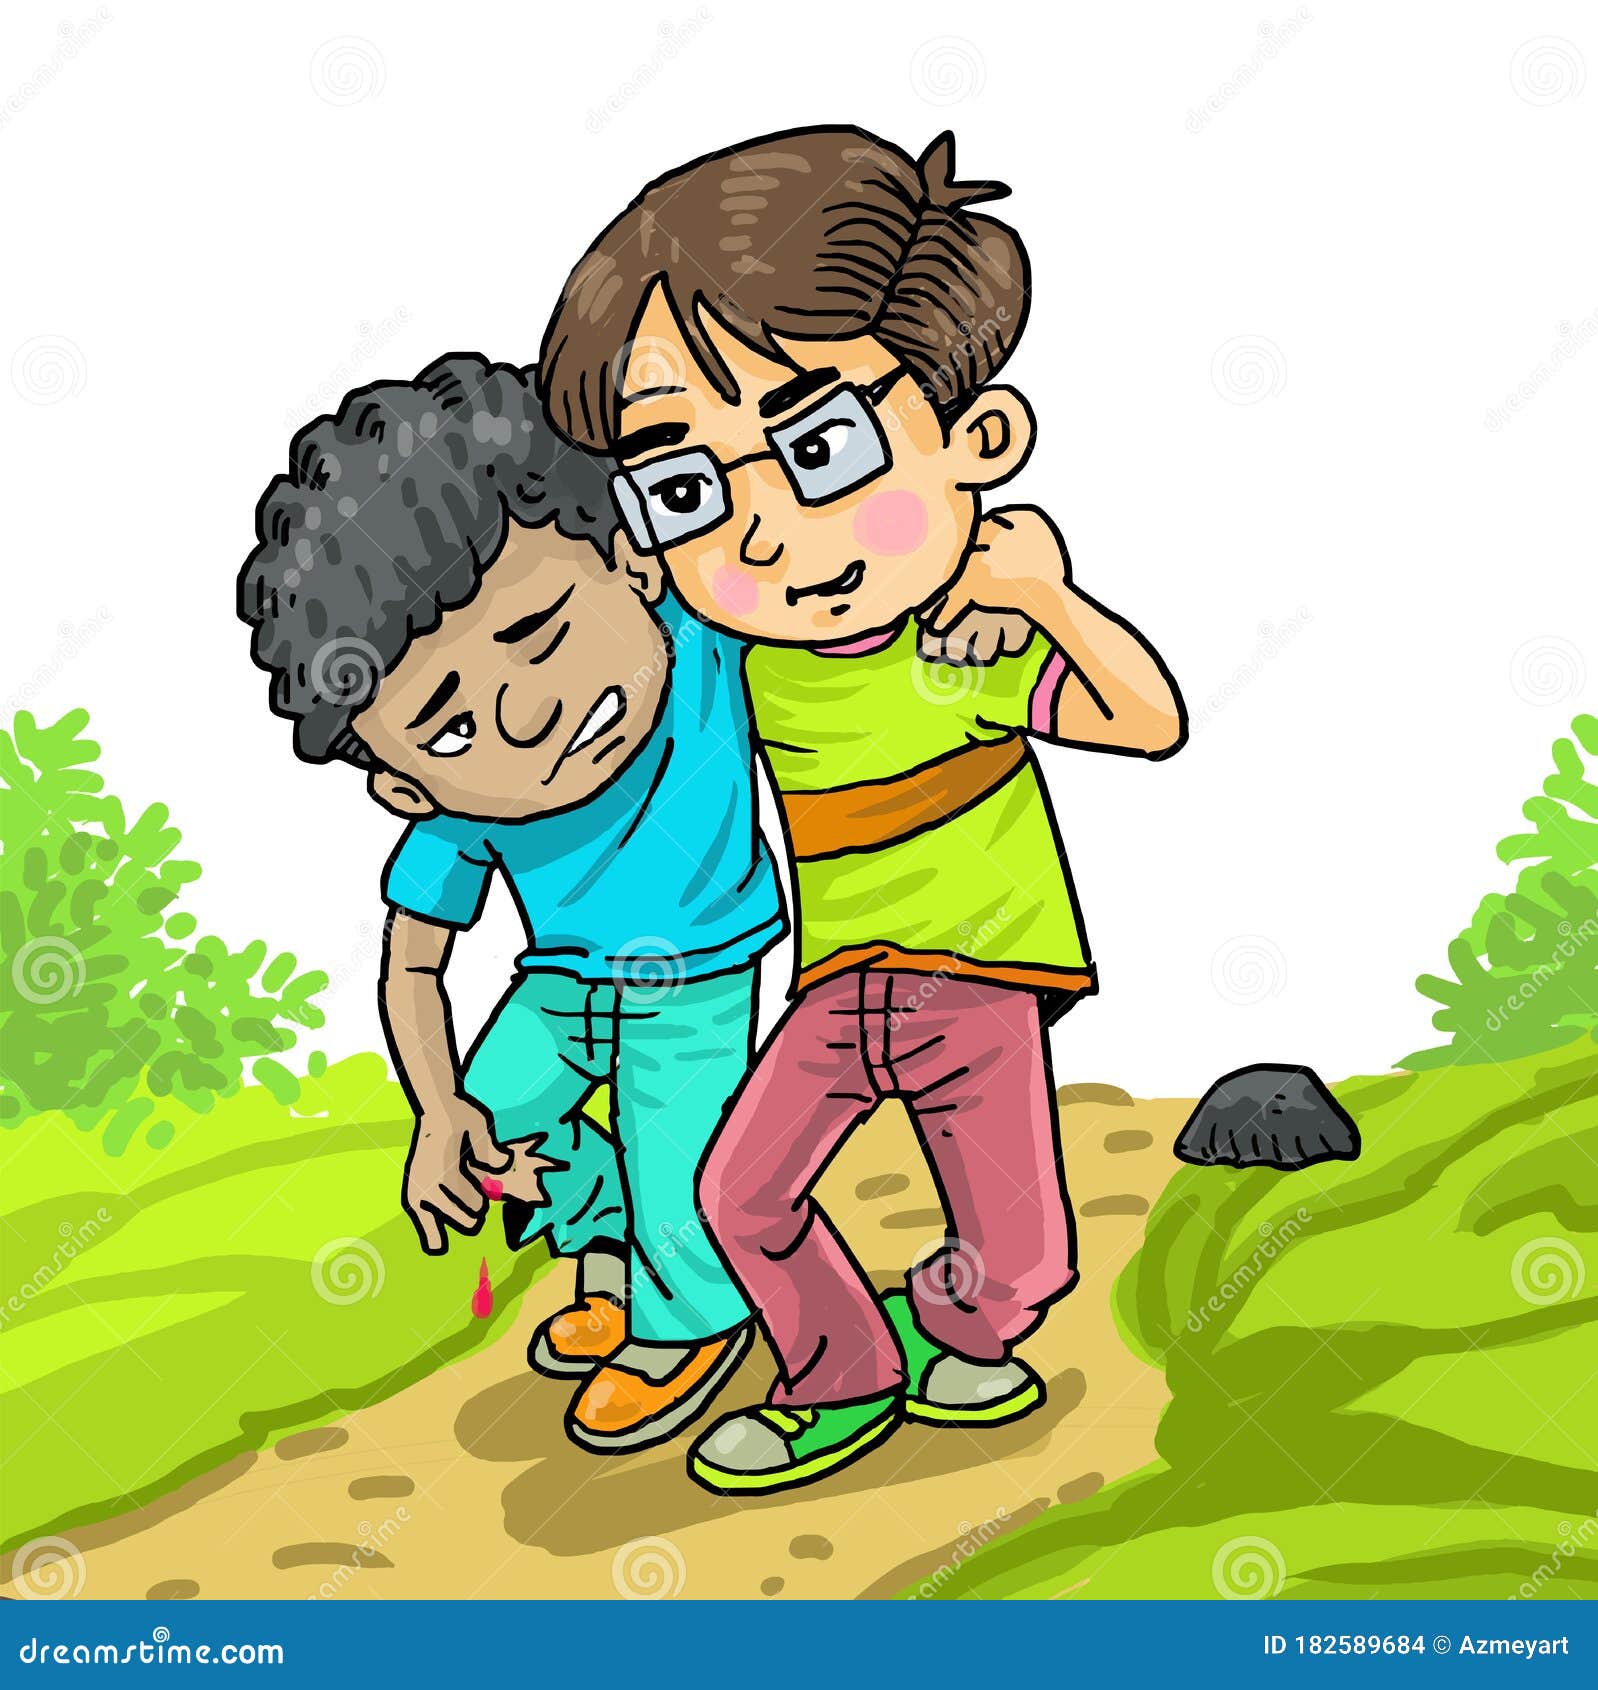 Kid Helping His Friend That Was Injured In The Accident Stock Vector Illustration Of Accident Health